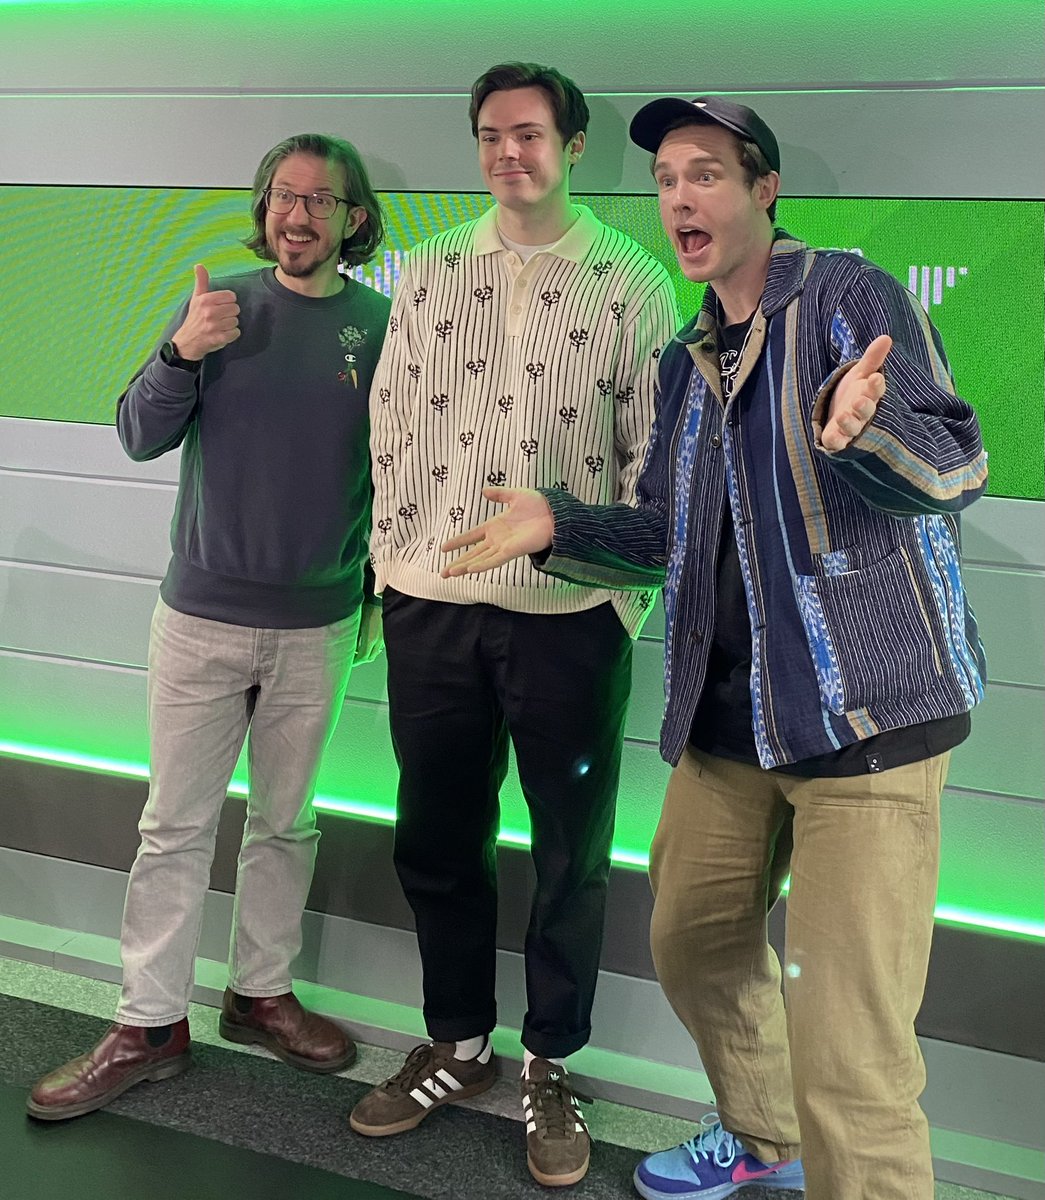 Yesterday, comedian @rhysjamesy spoke to @EdGambleComedy and @matthewcrosby about his and @marksmithstuff new podcast ‘Dial F For Football’. Listen to his @RadioX interview here: globalplayer.com/podcasts/episo…